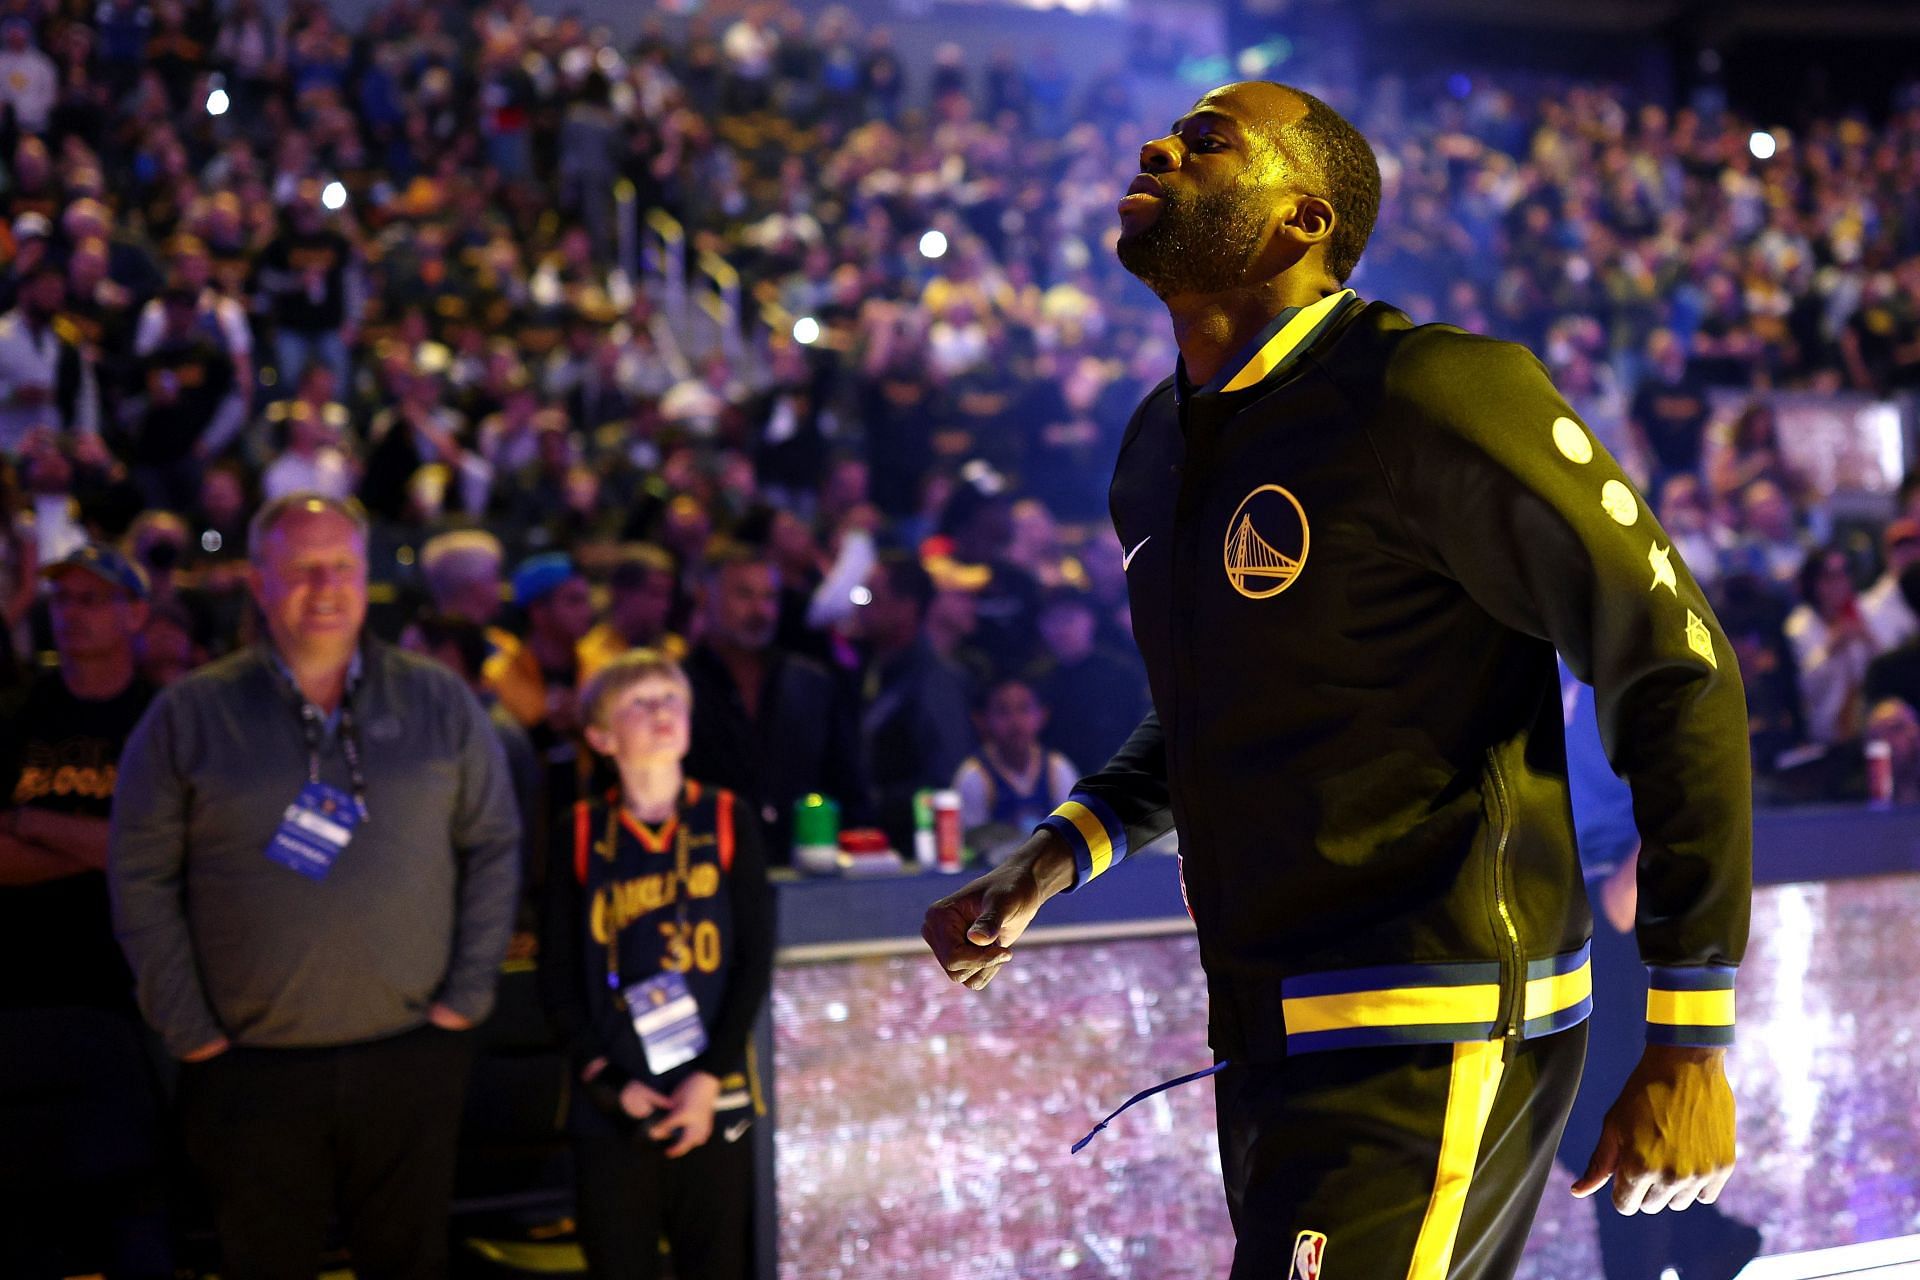 Draymond Green being introduced at the 2022 NBA playoffs